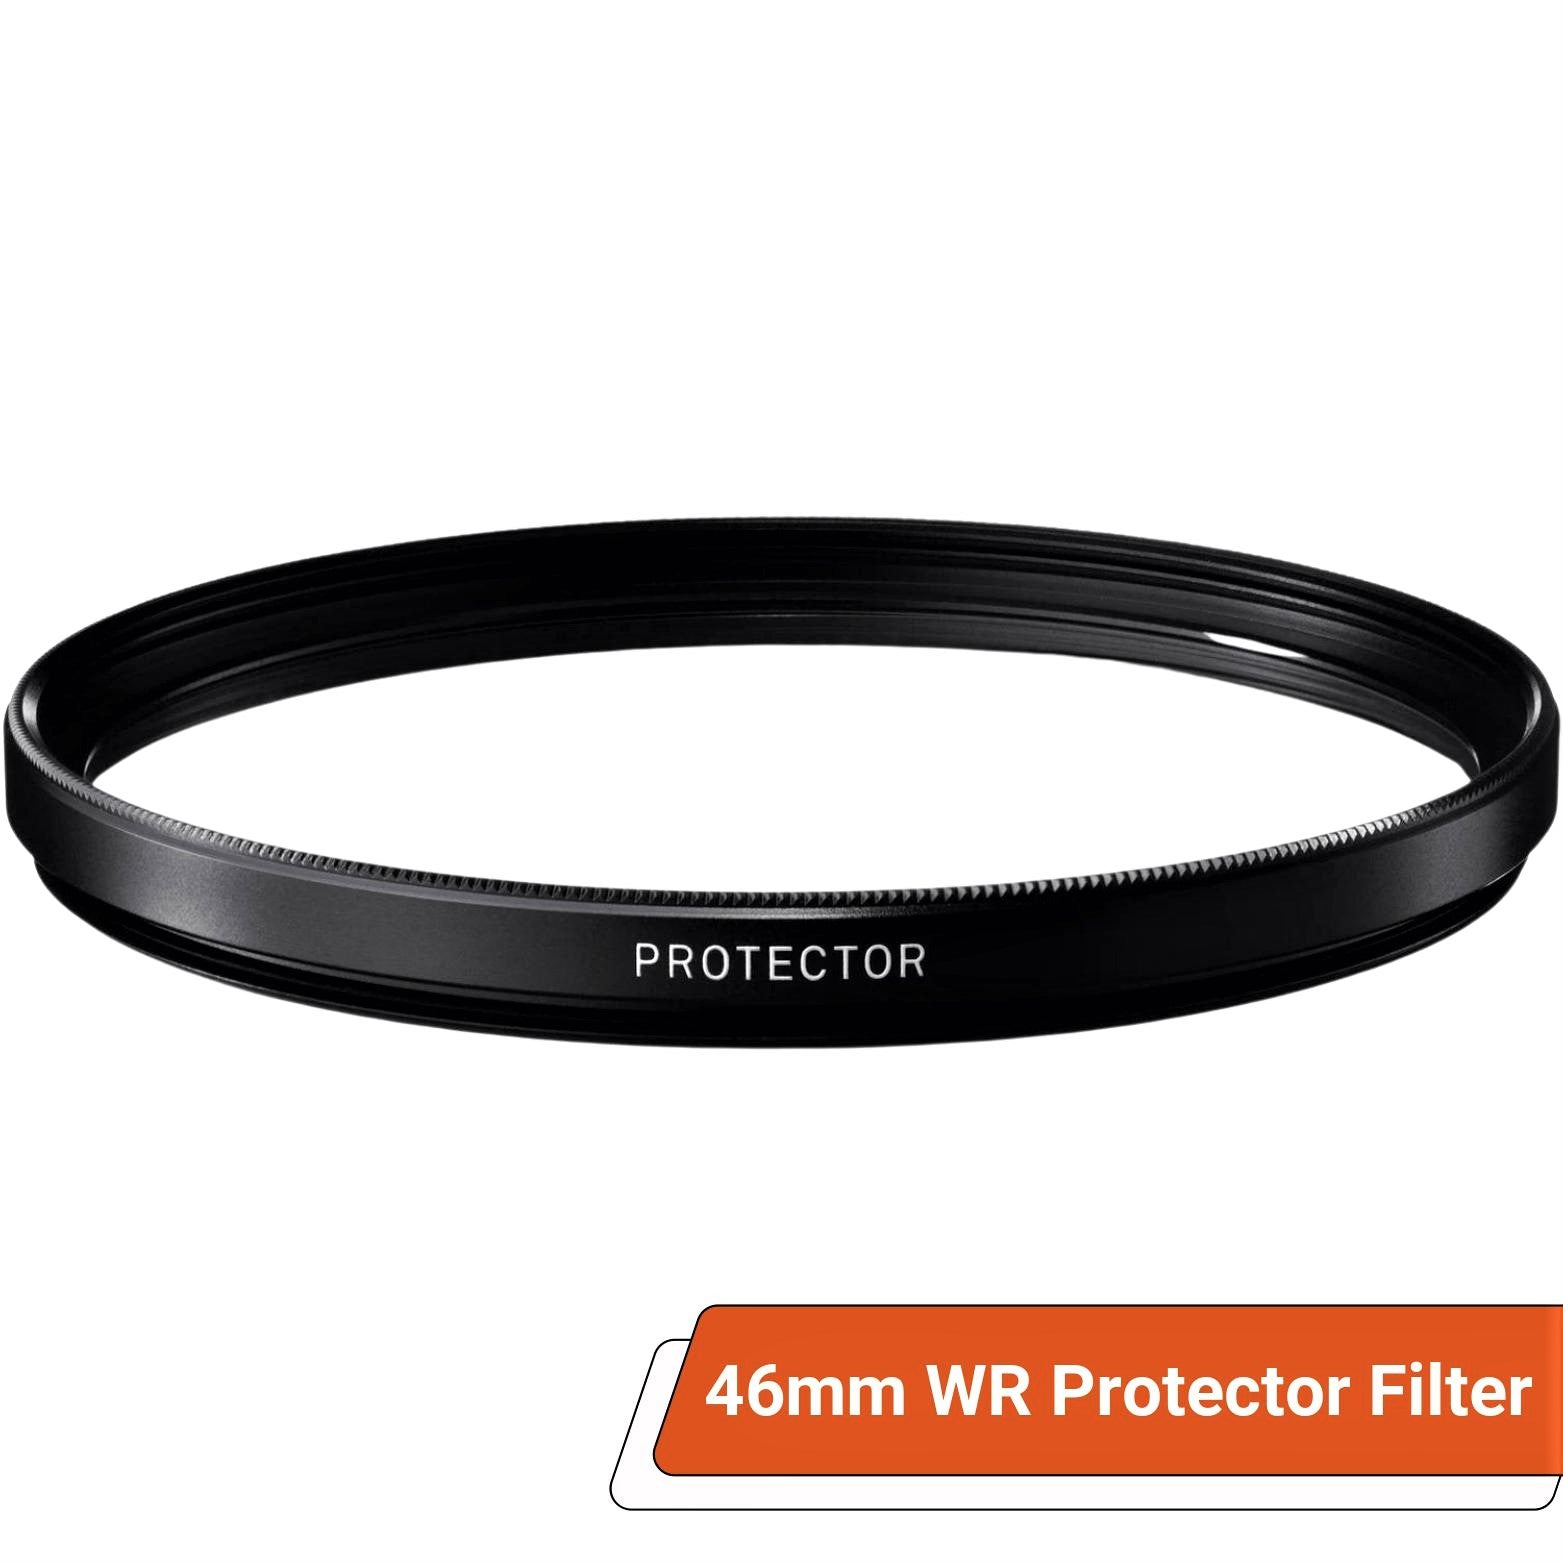 Sigma 46mm WR (Water Repellent) Protector Filter